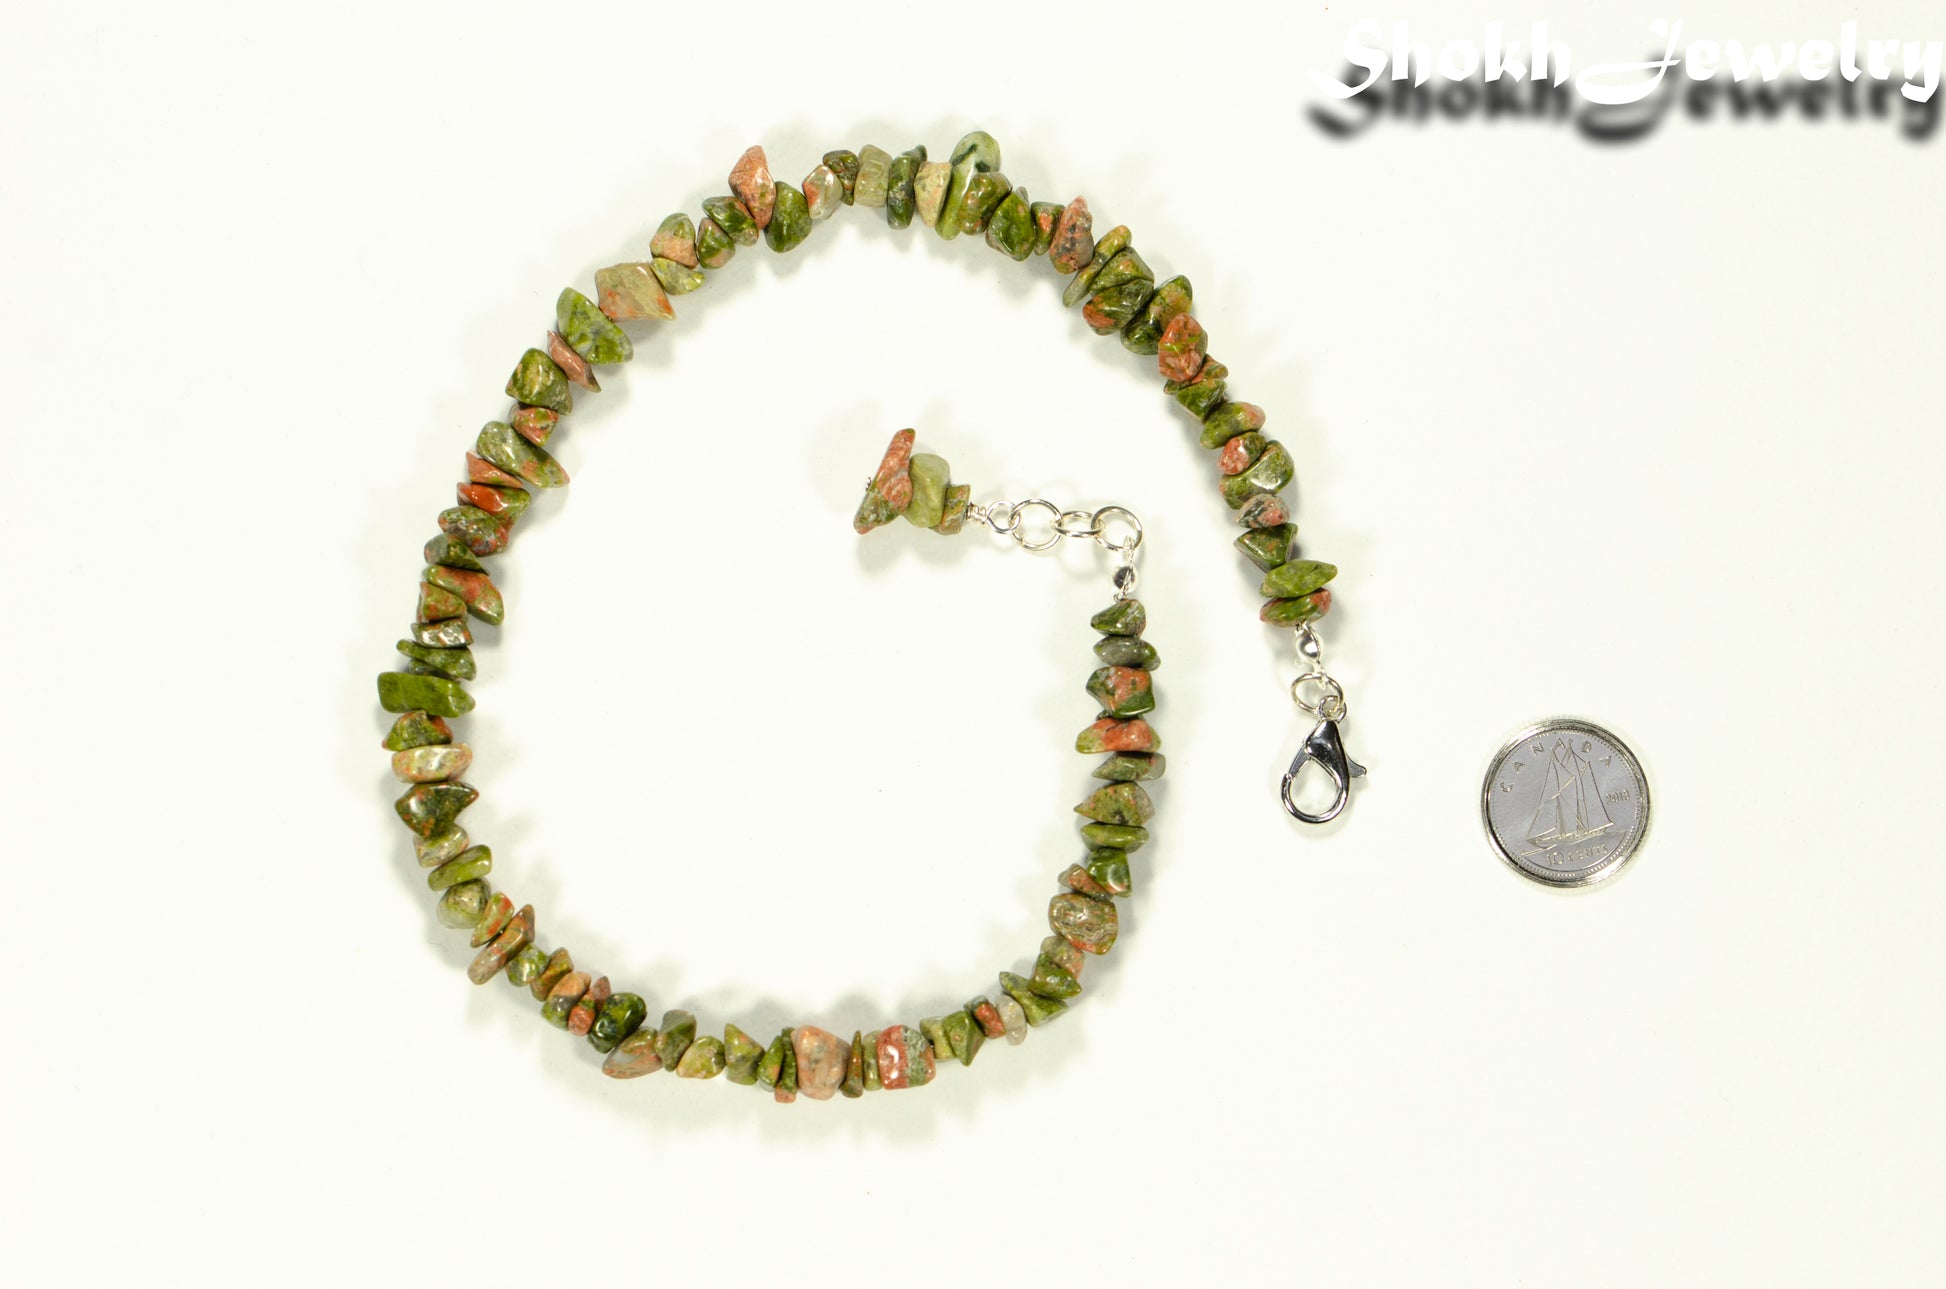 Natural Unakite Crystal Chip Choker Necklace beside a dime.